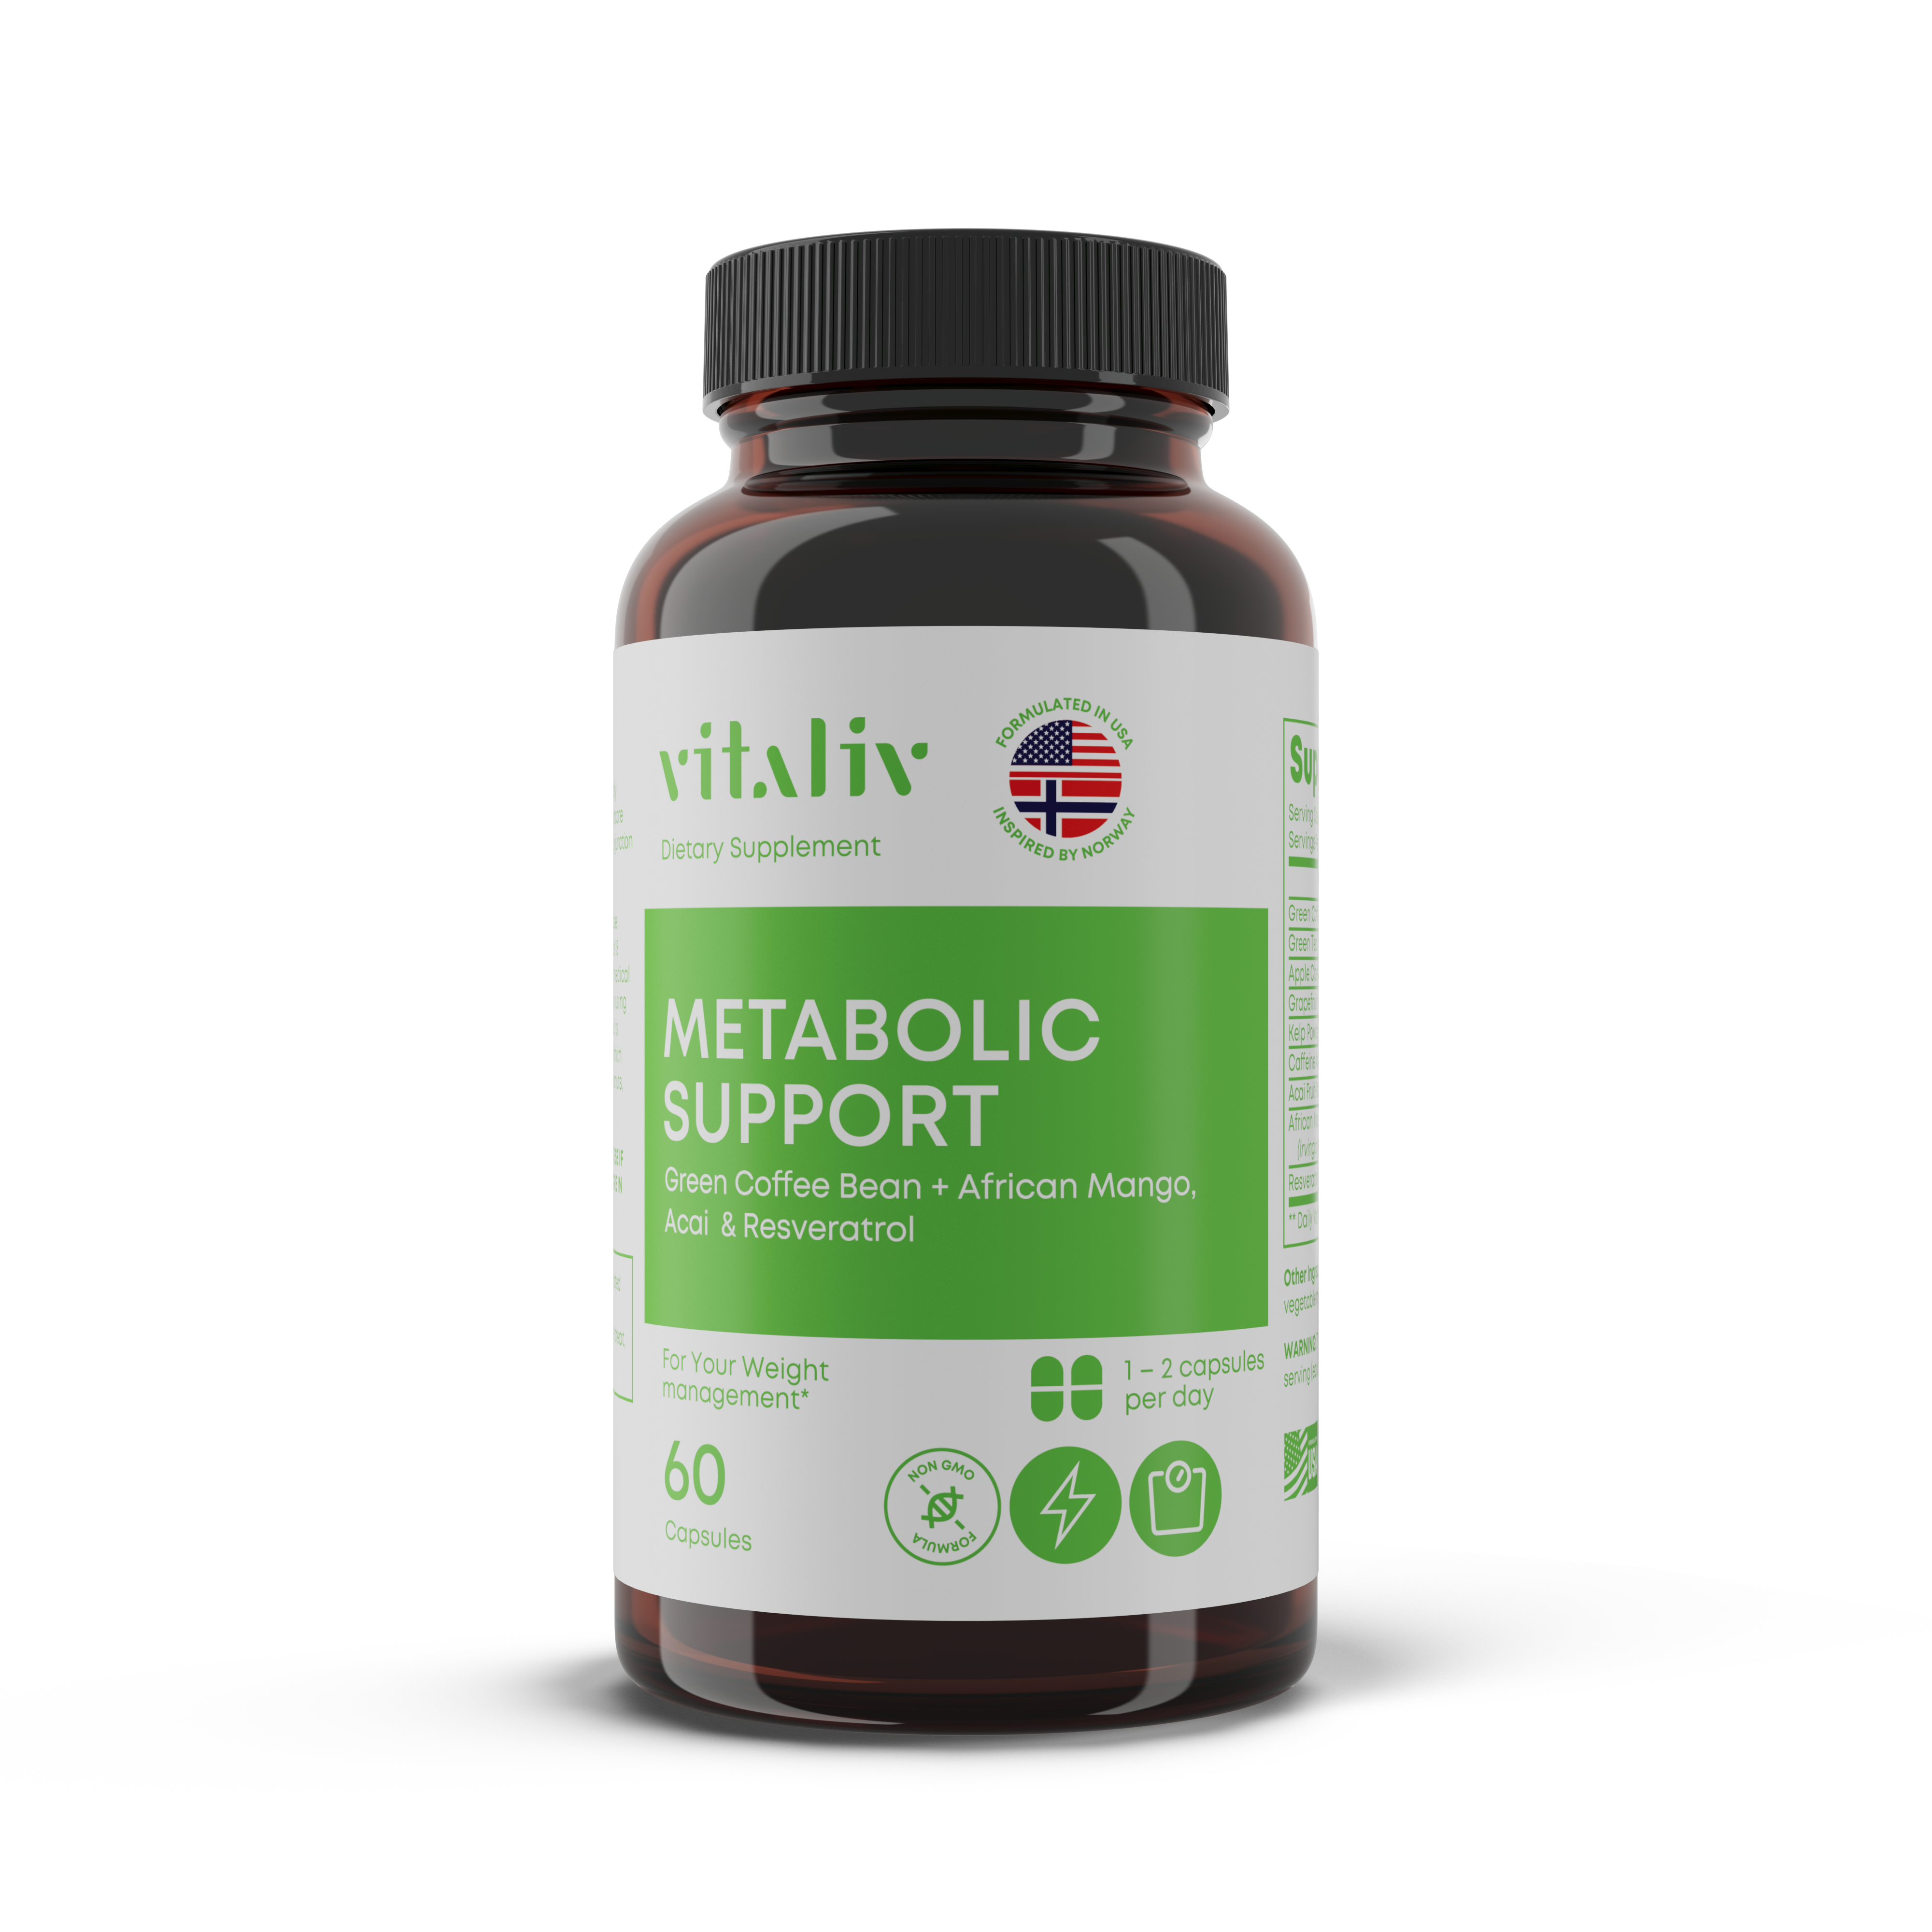 Effective metabolic support